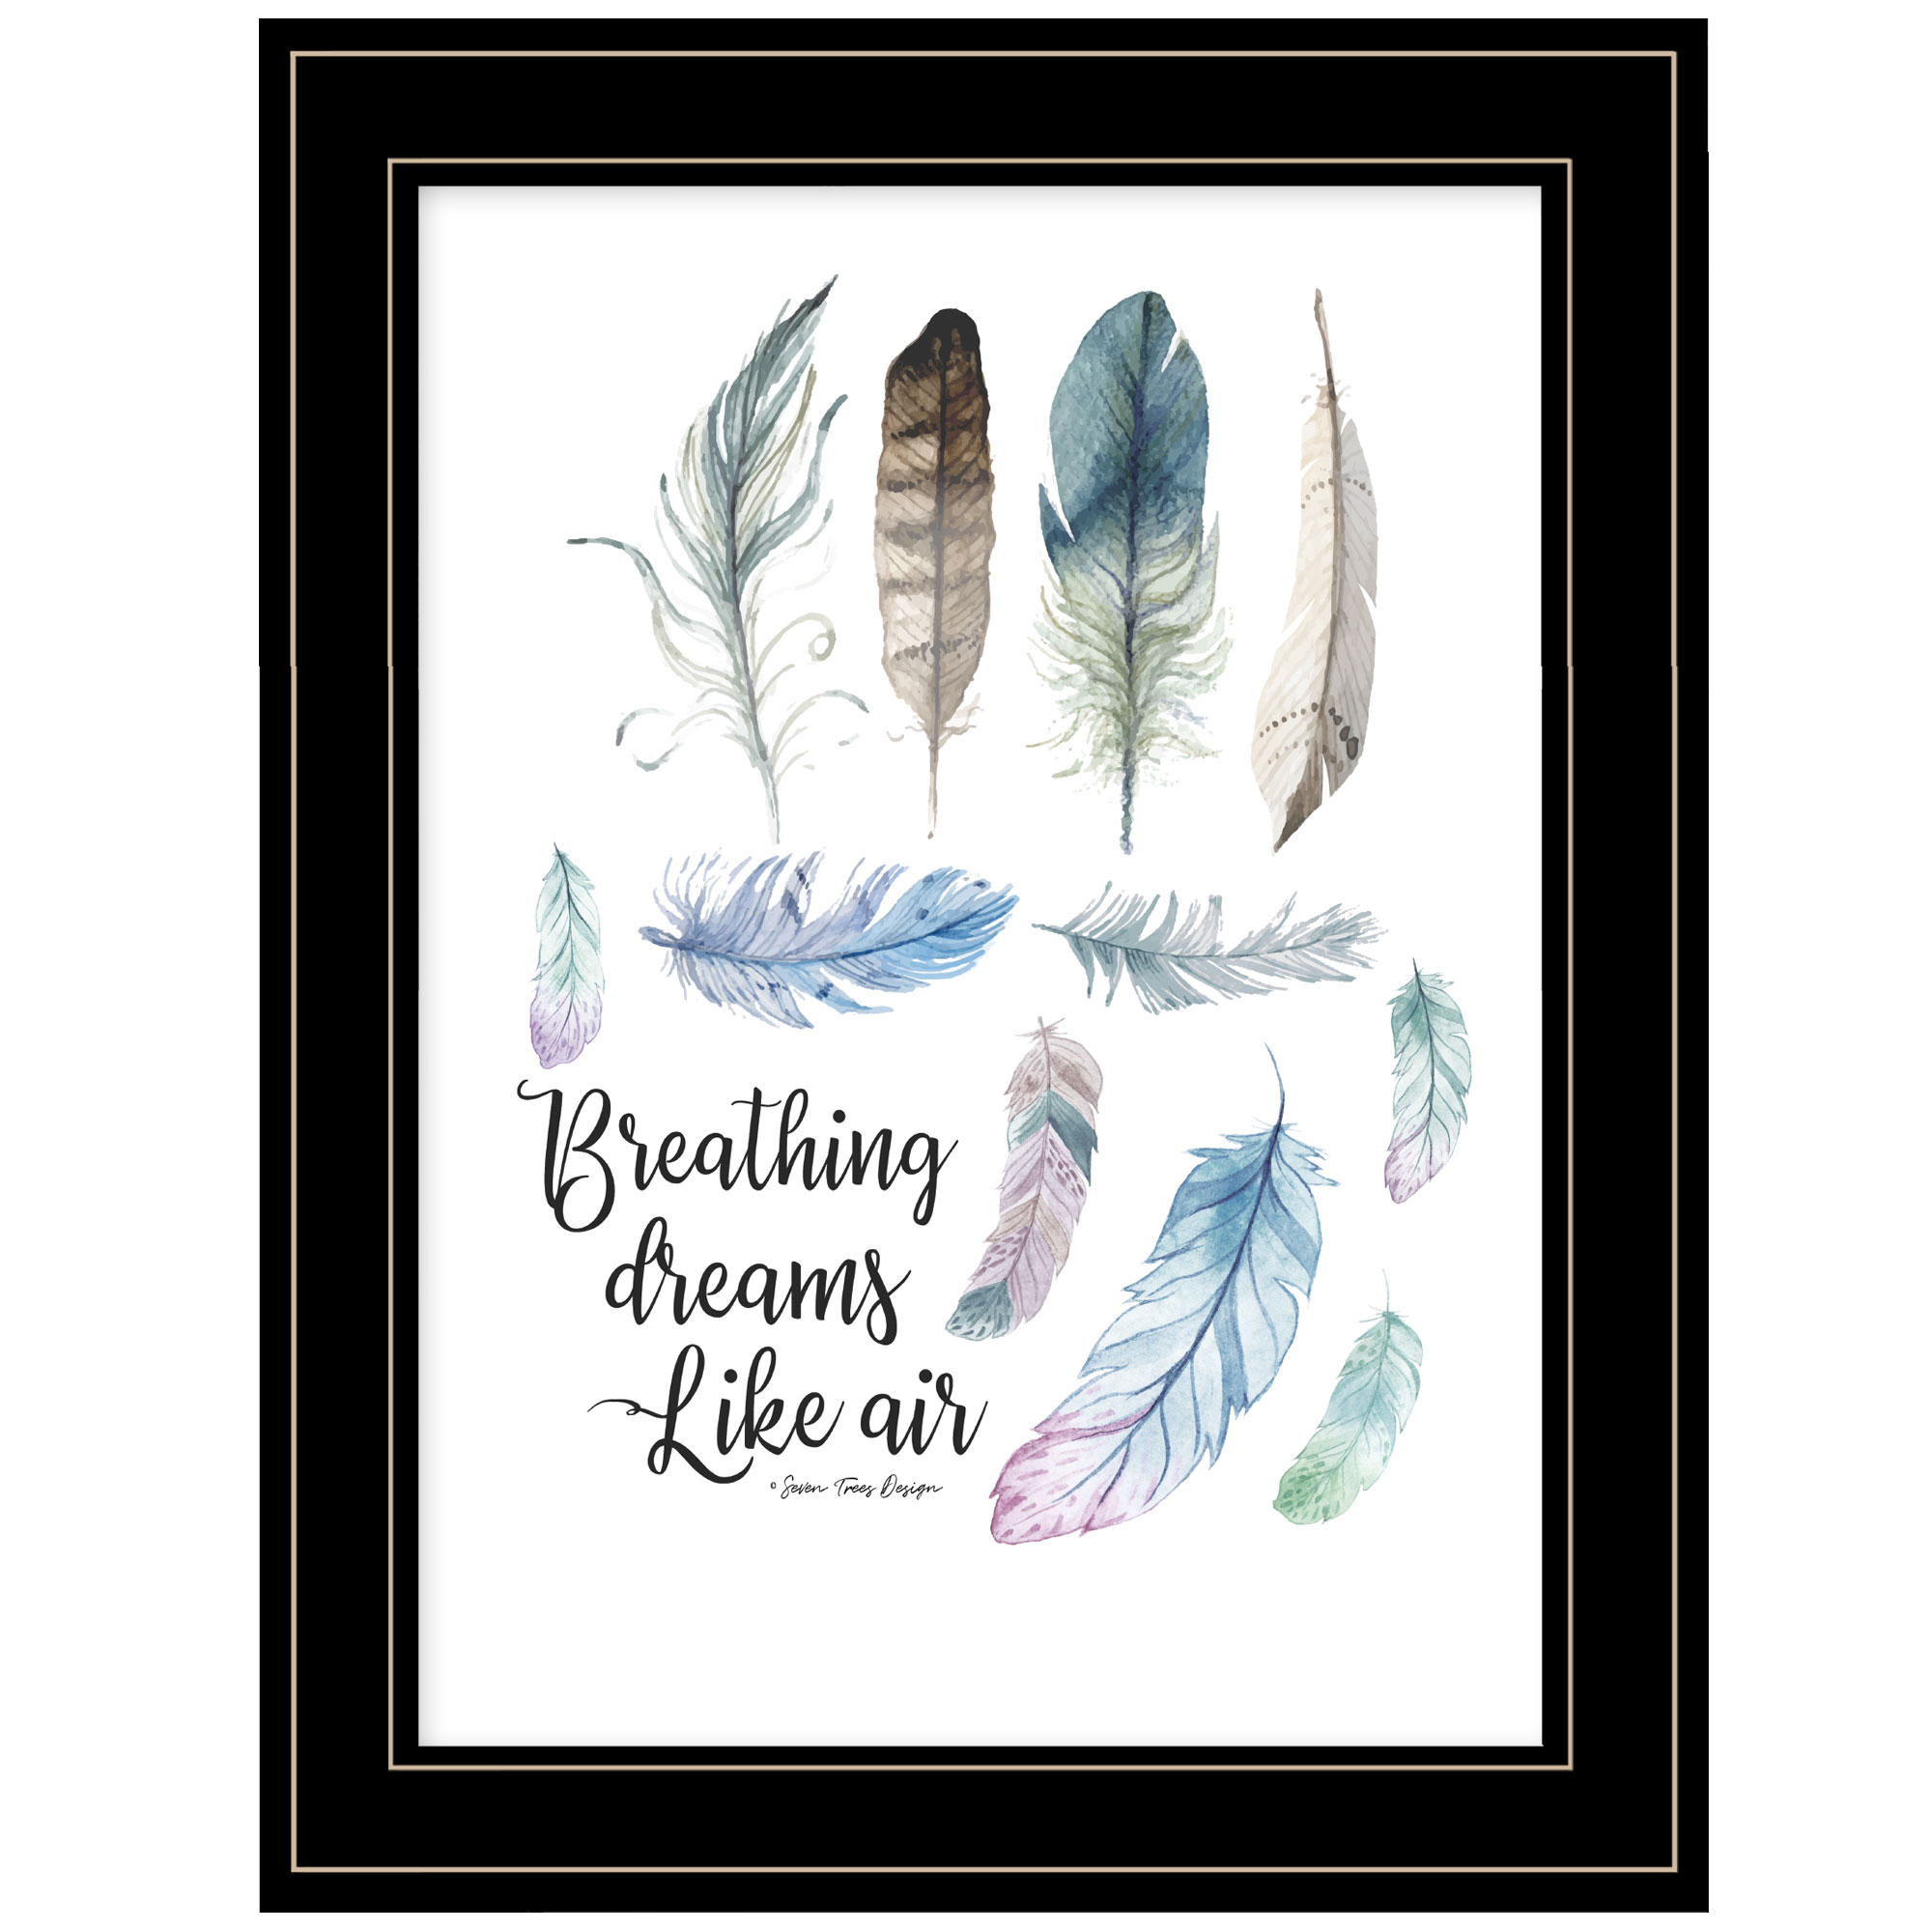 "Breathing Dreams Like Air" by Seven Trees Design, Ready to Hang Framed Print, Black Frame